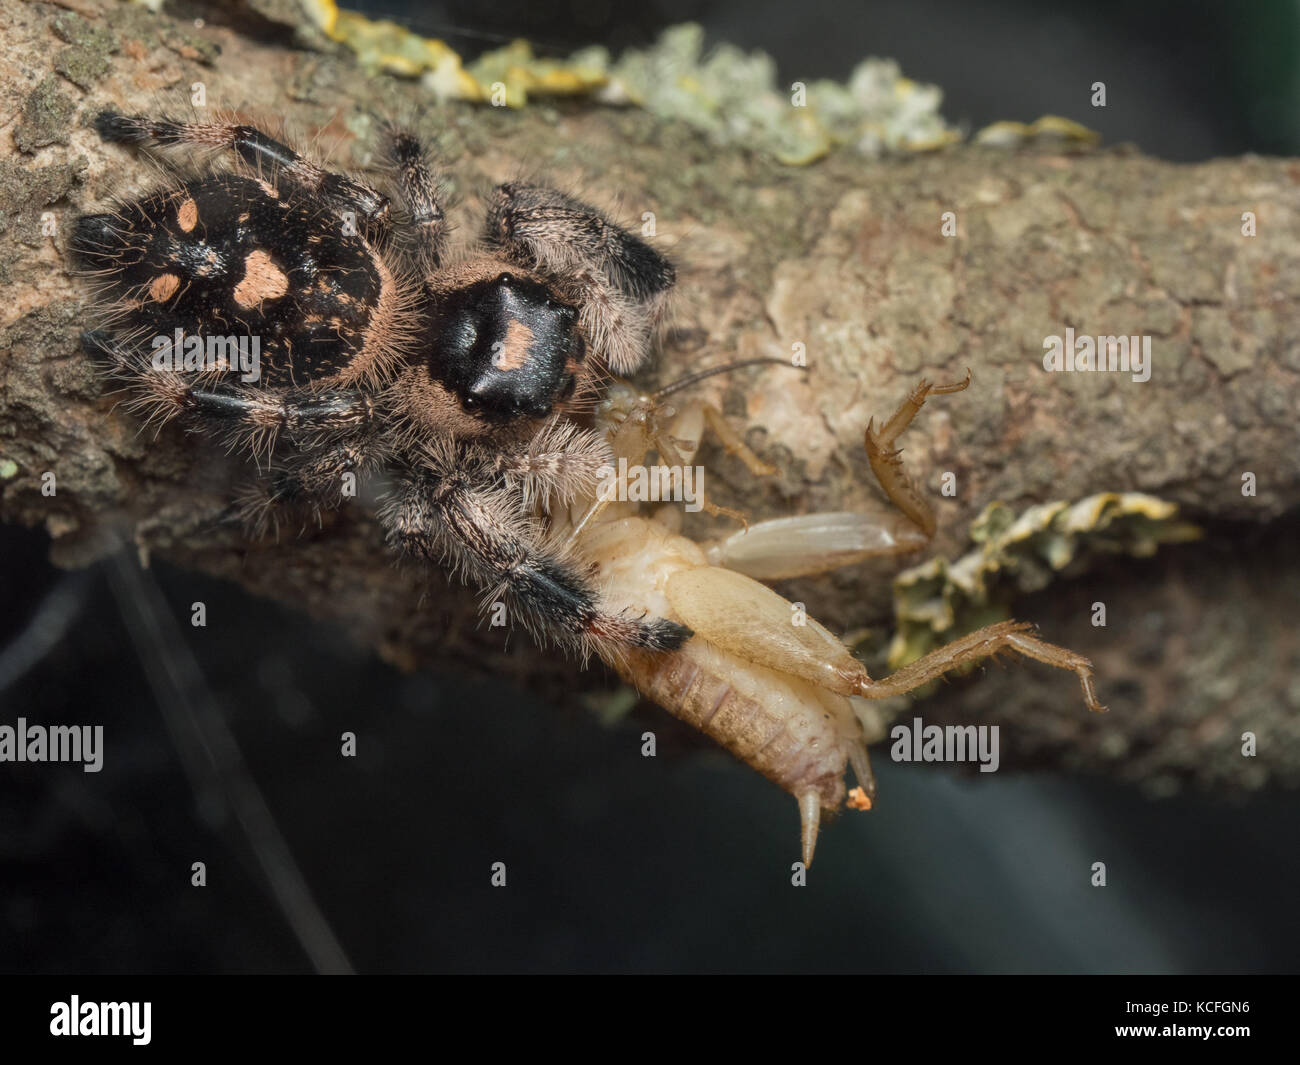 A close up of Phidippus regius eating a cricket Stock Photo